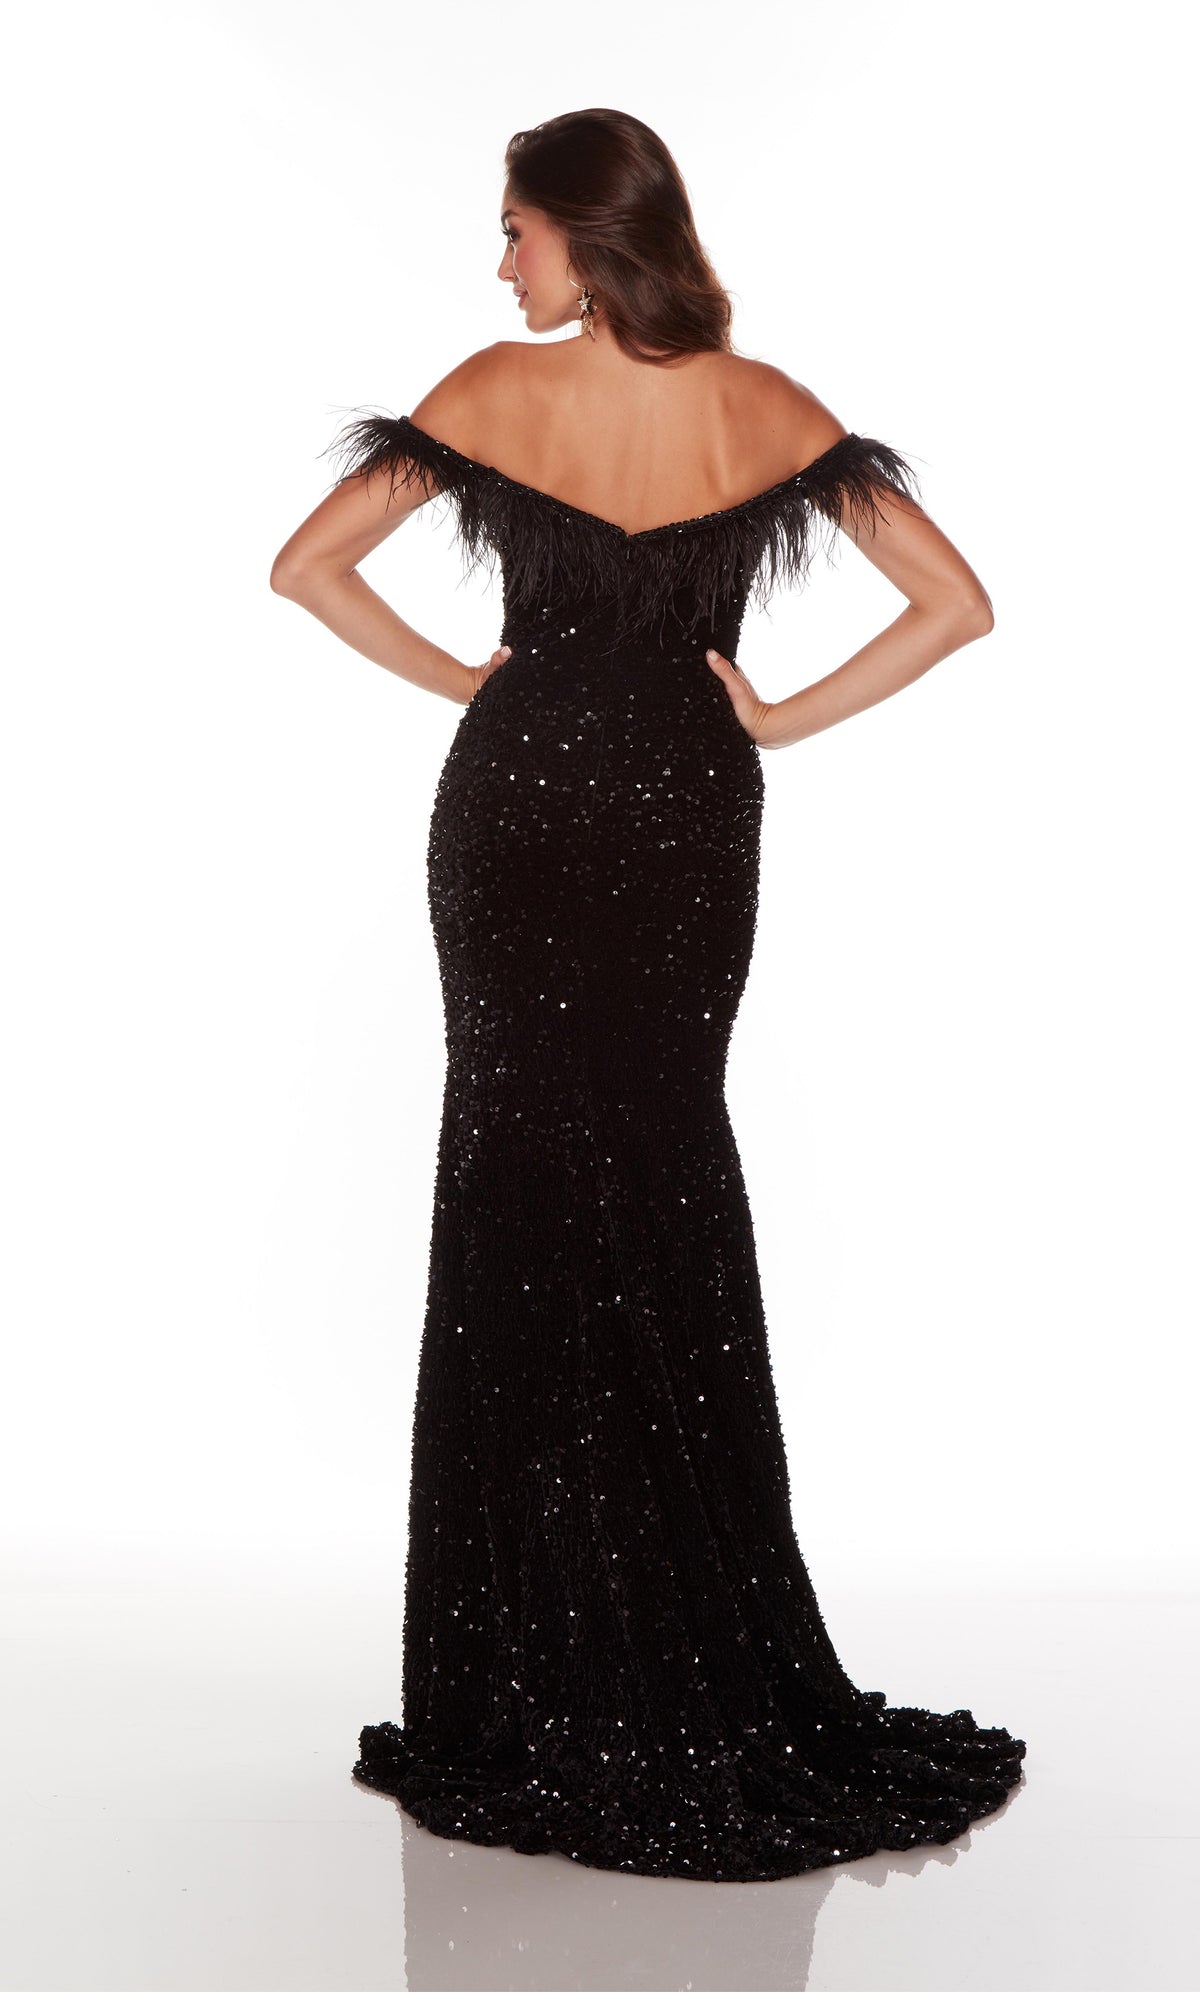 Black off the shoulder prom dress with feathers,  a zip up back, and train.